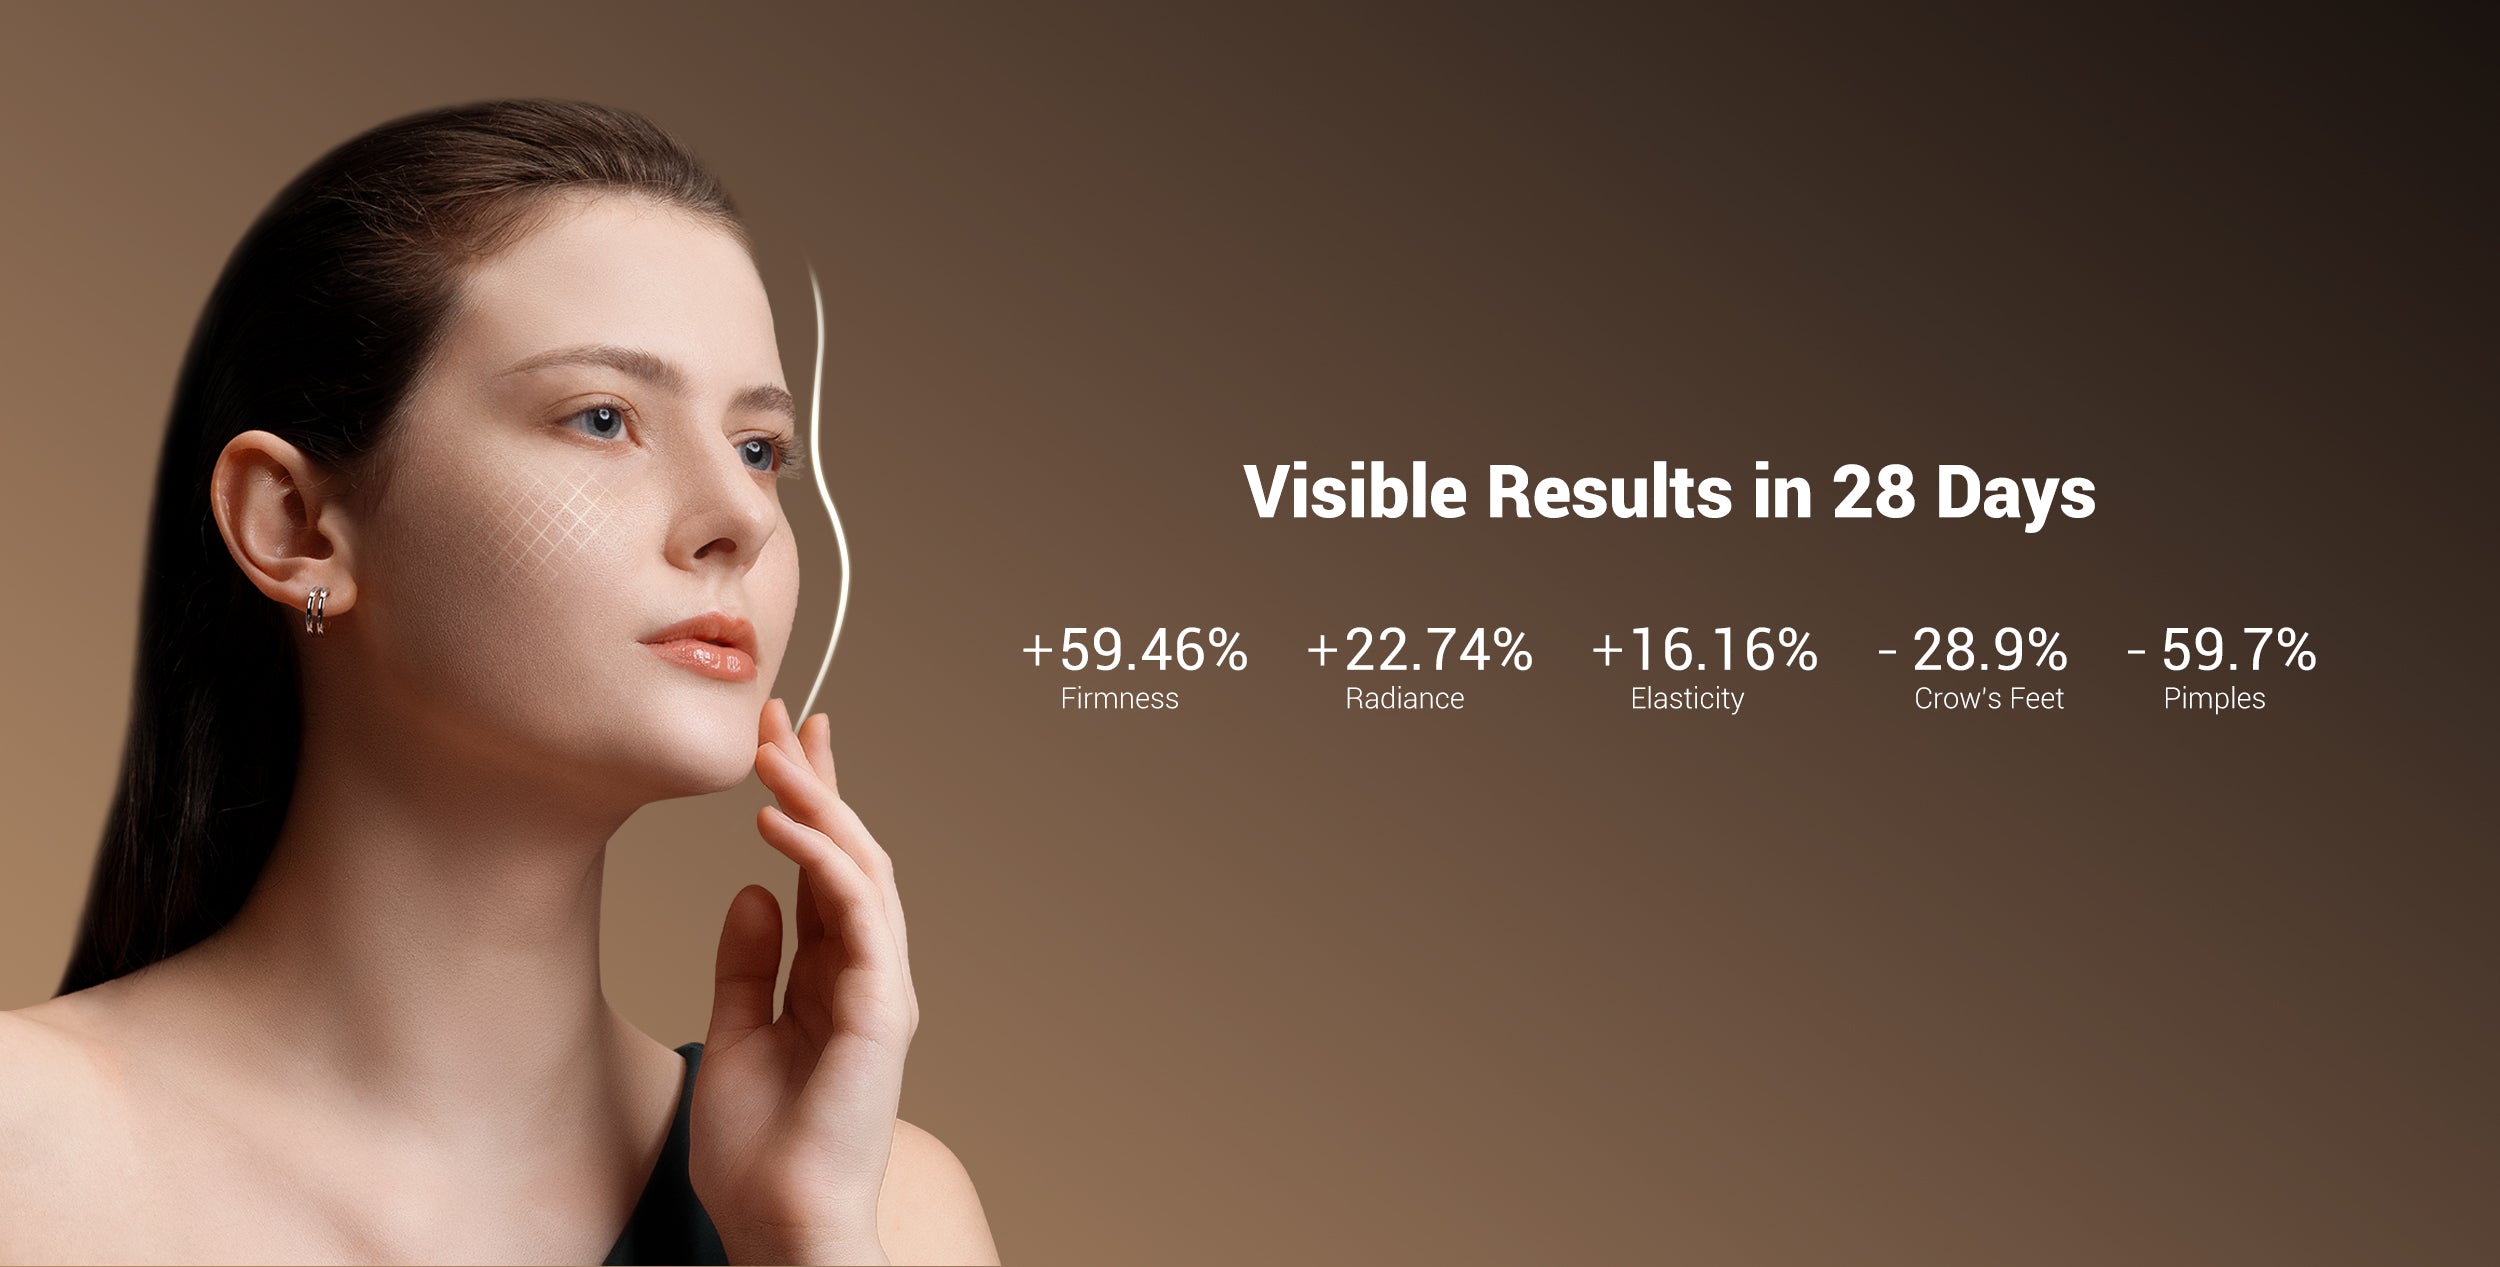 28-day skin transformation showing increased firmness, radiance, and elasticity with decreased crow's feet and pimples using JOVS LED light therapy.